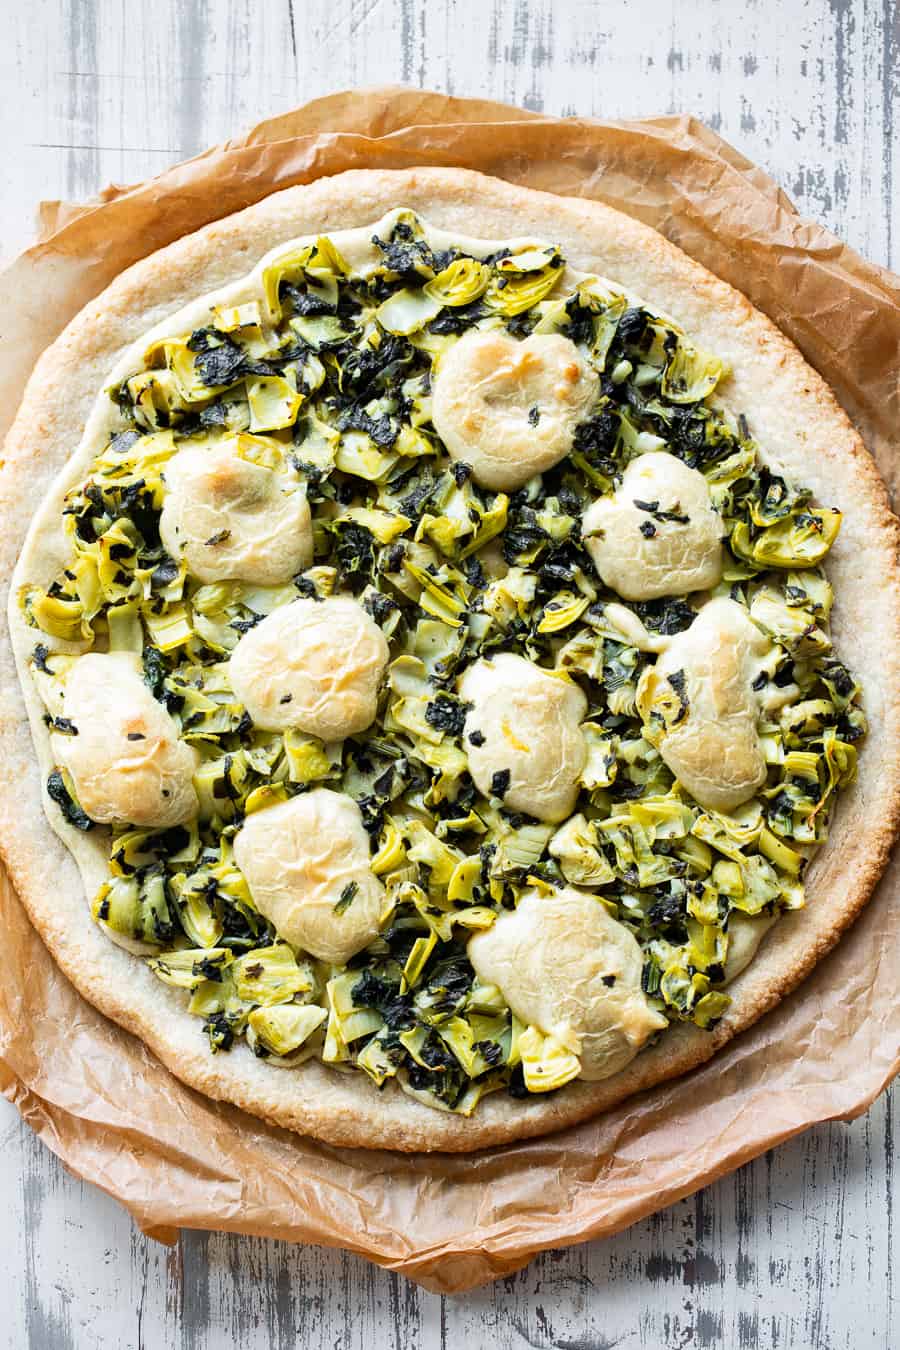 This Spinach Artichoke Pizza has the perfect one-bowl chewy crust and is topped with the best homemade cashew cheese plus a savory spinach artichoke mixture! Paleo, Vegan, gluten free, dairy free, egg free and sugar free. #paleo #Vegan #glutenfree #pizza #dairyfree